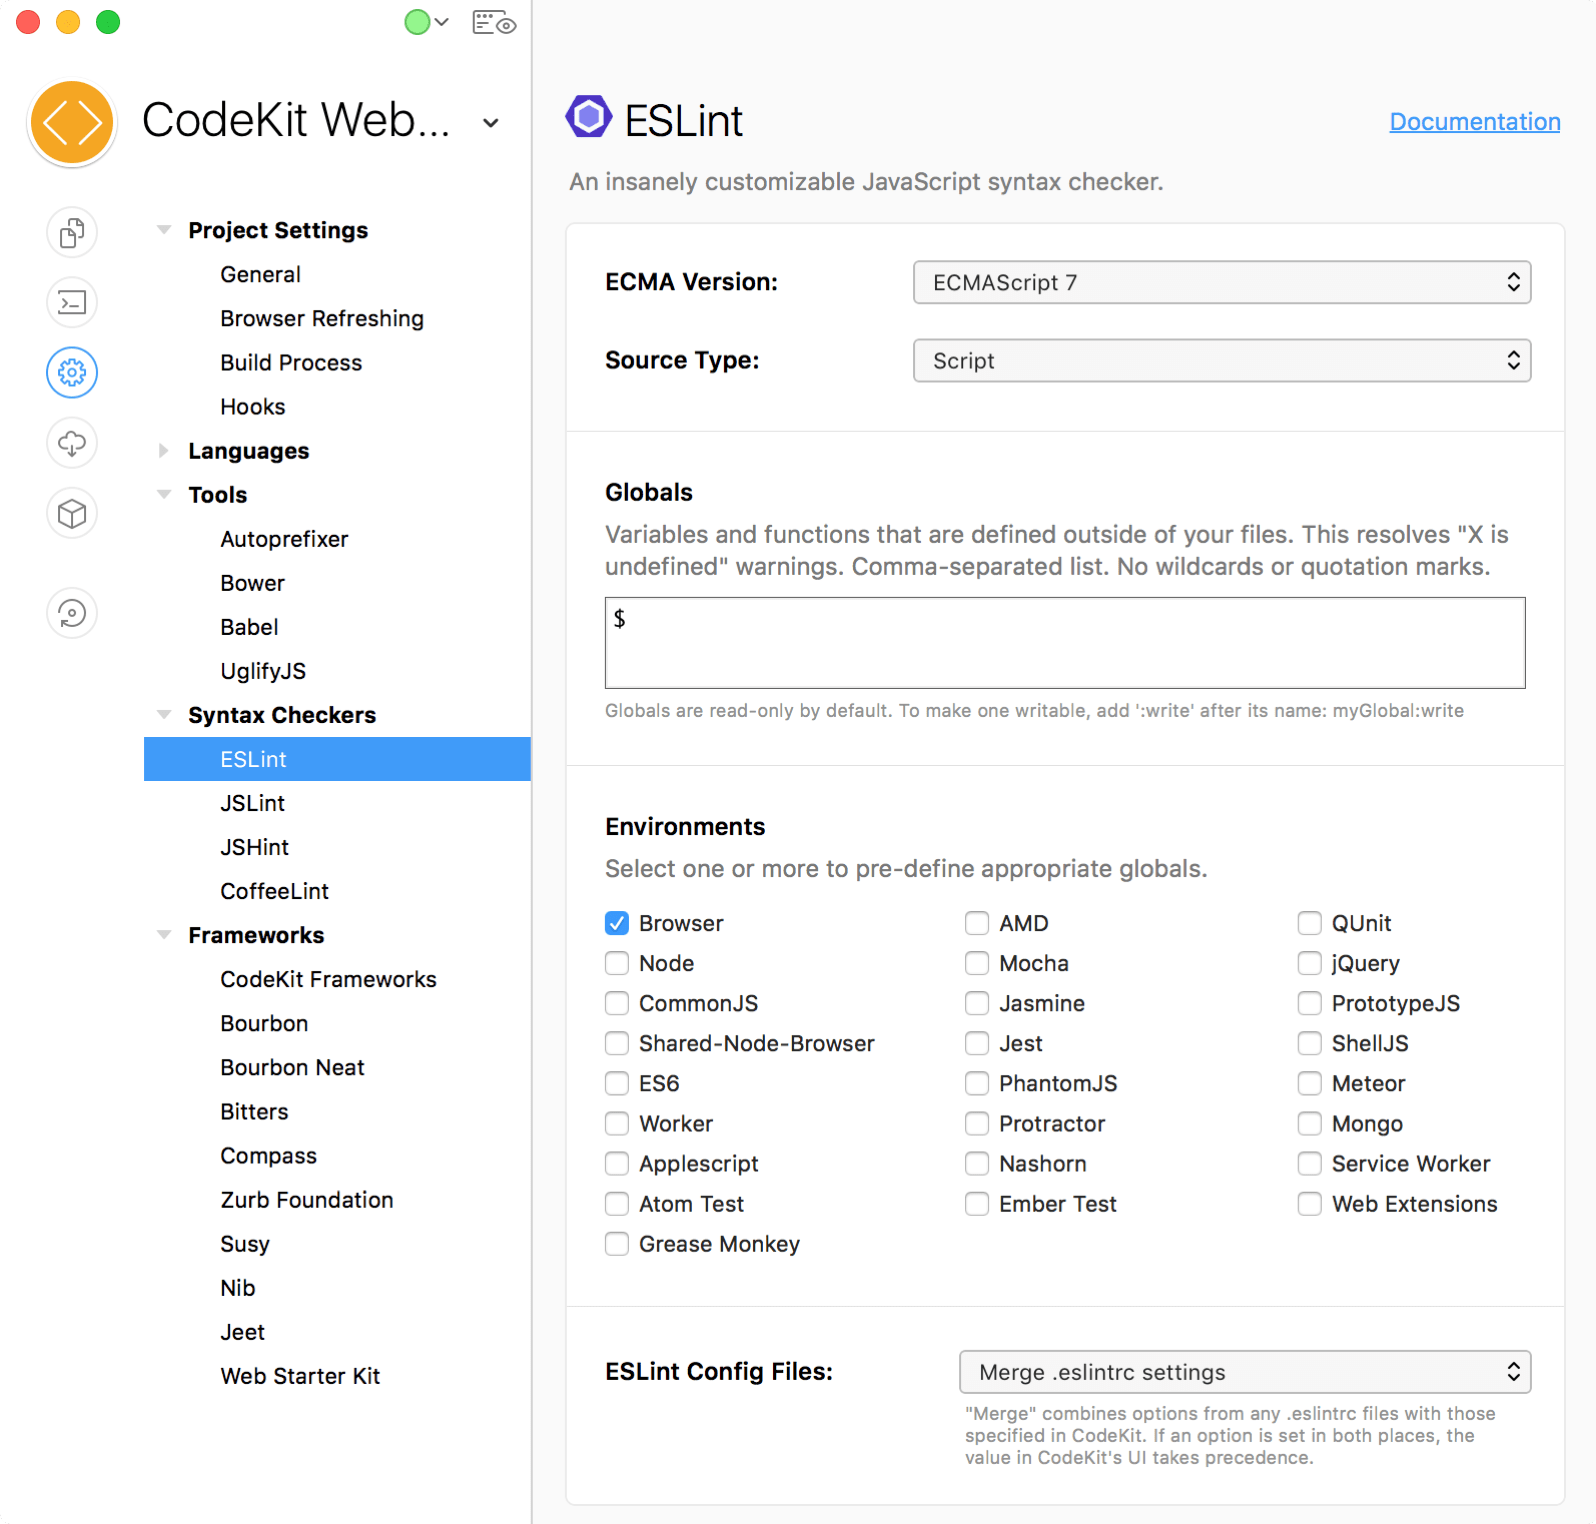 A screenshot of the ESLint category in Project Settings in CodeKit